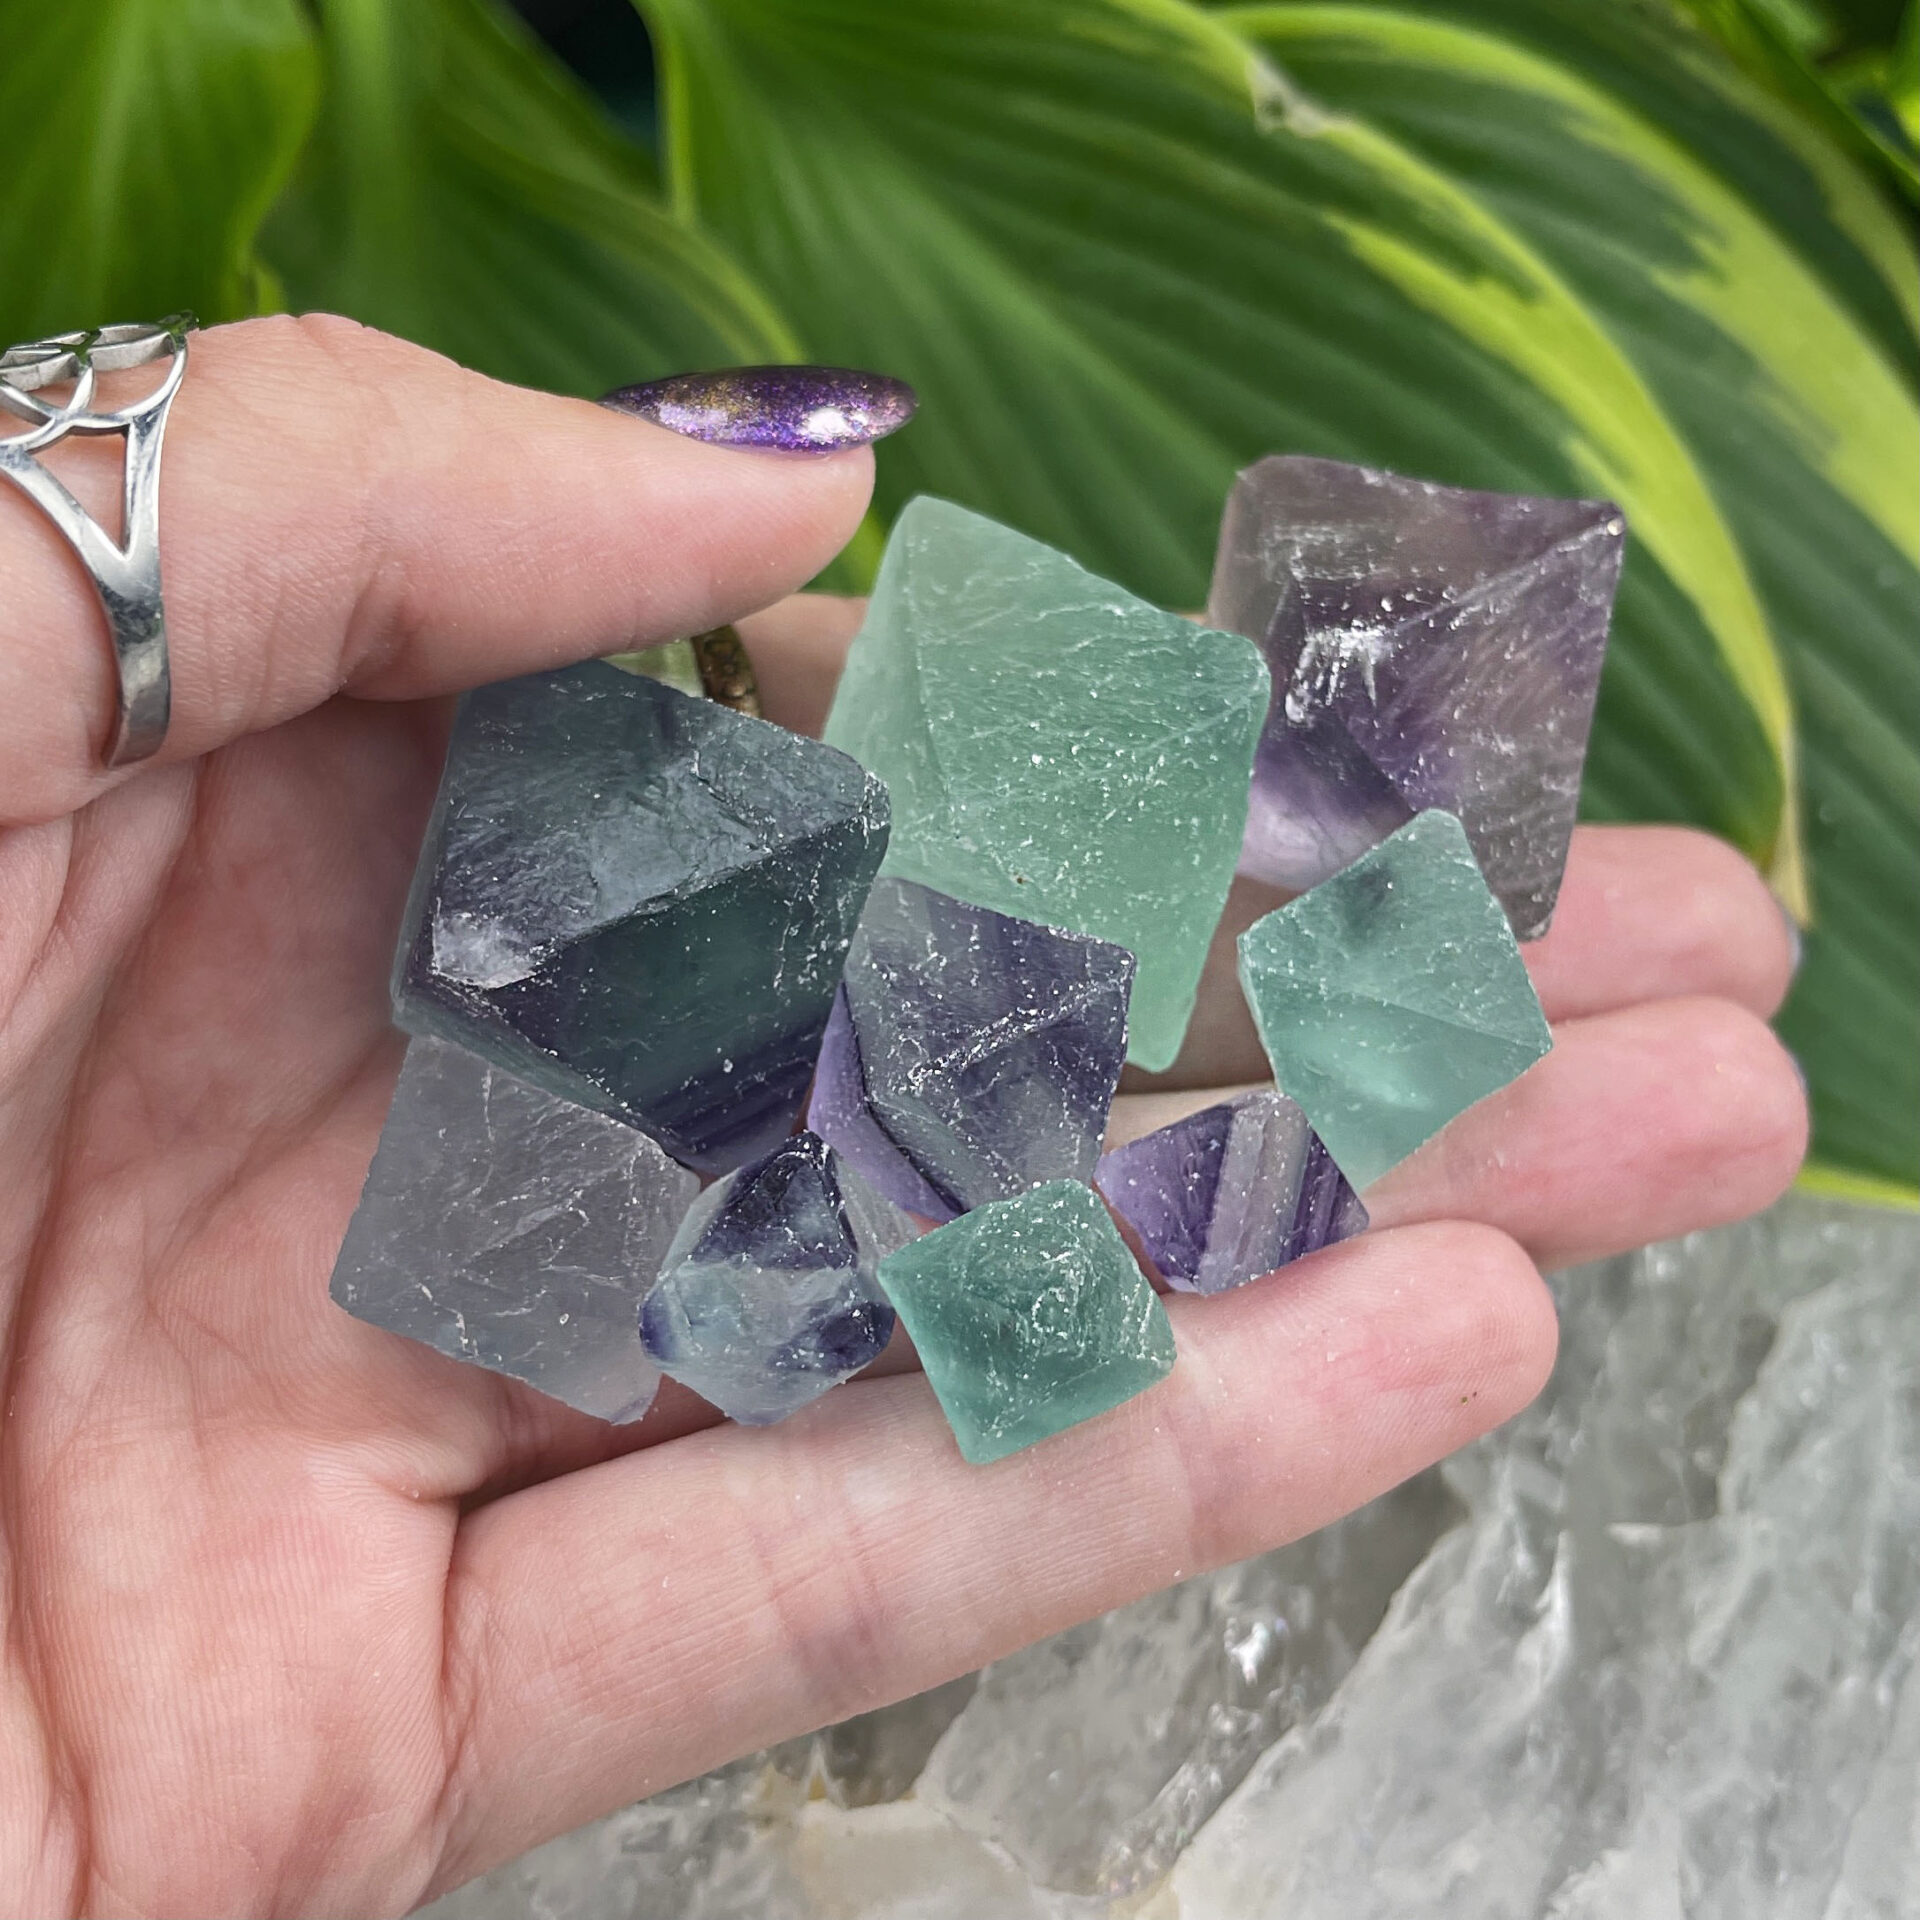 Lot Natural Clear Blue-Green Fluorite Crystal Point Octahedron Rough Specimens 